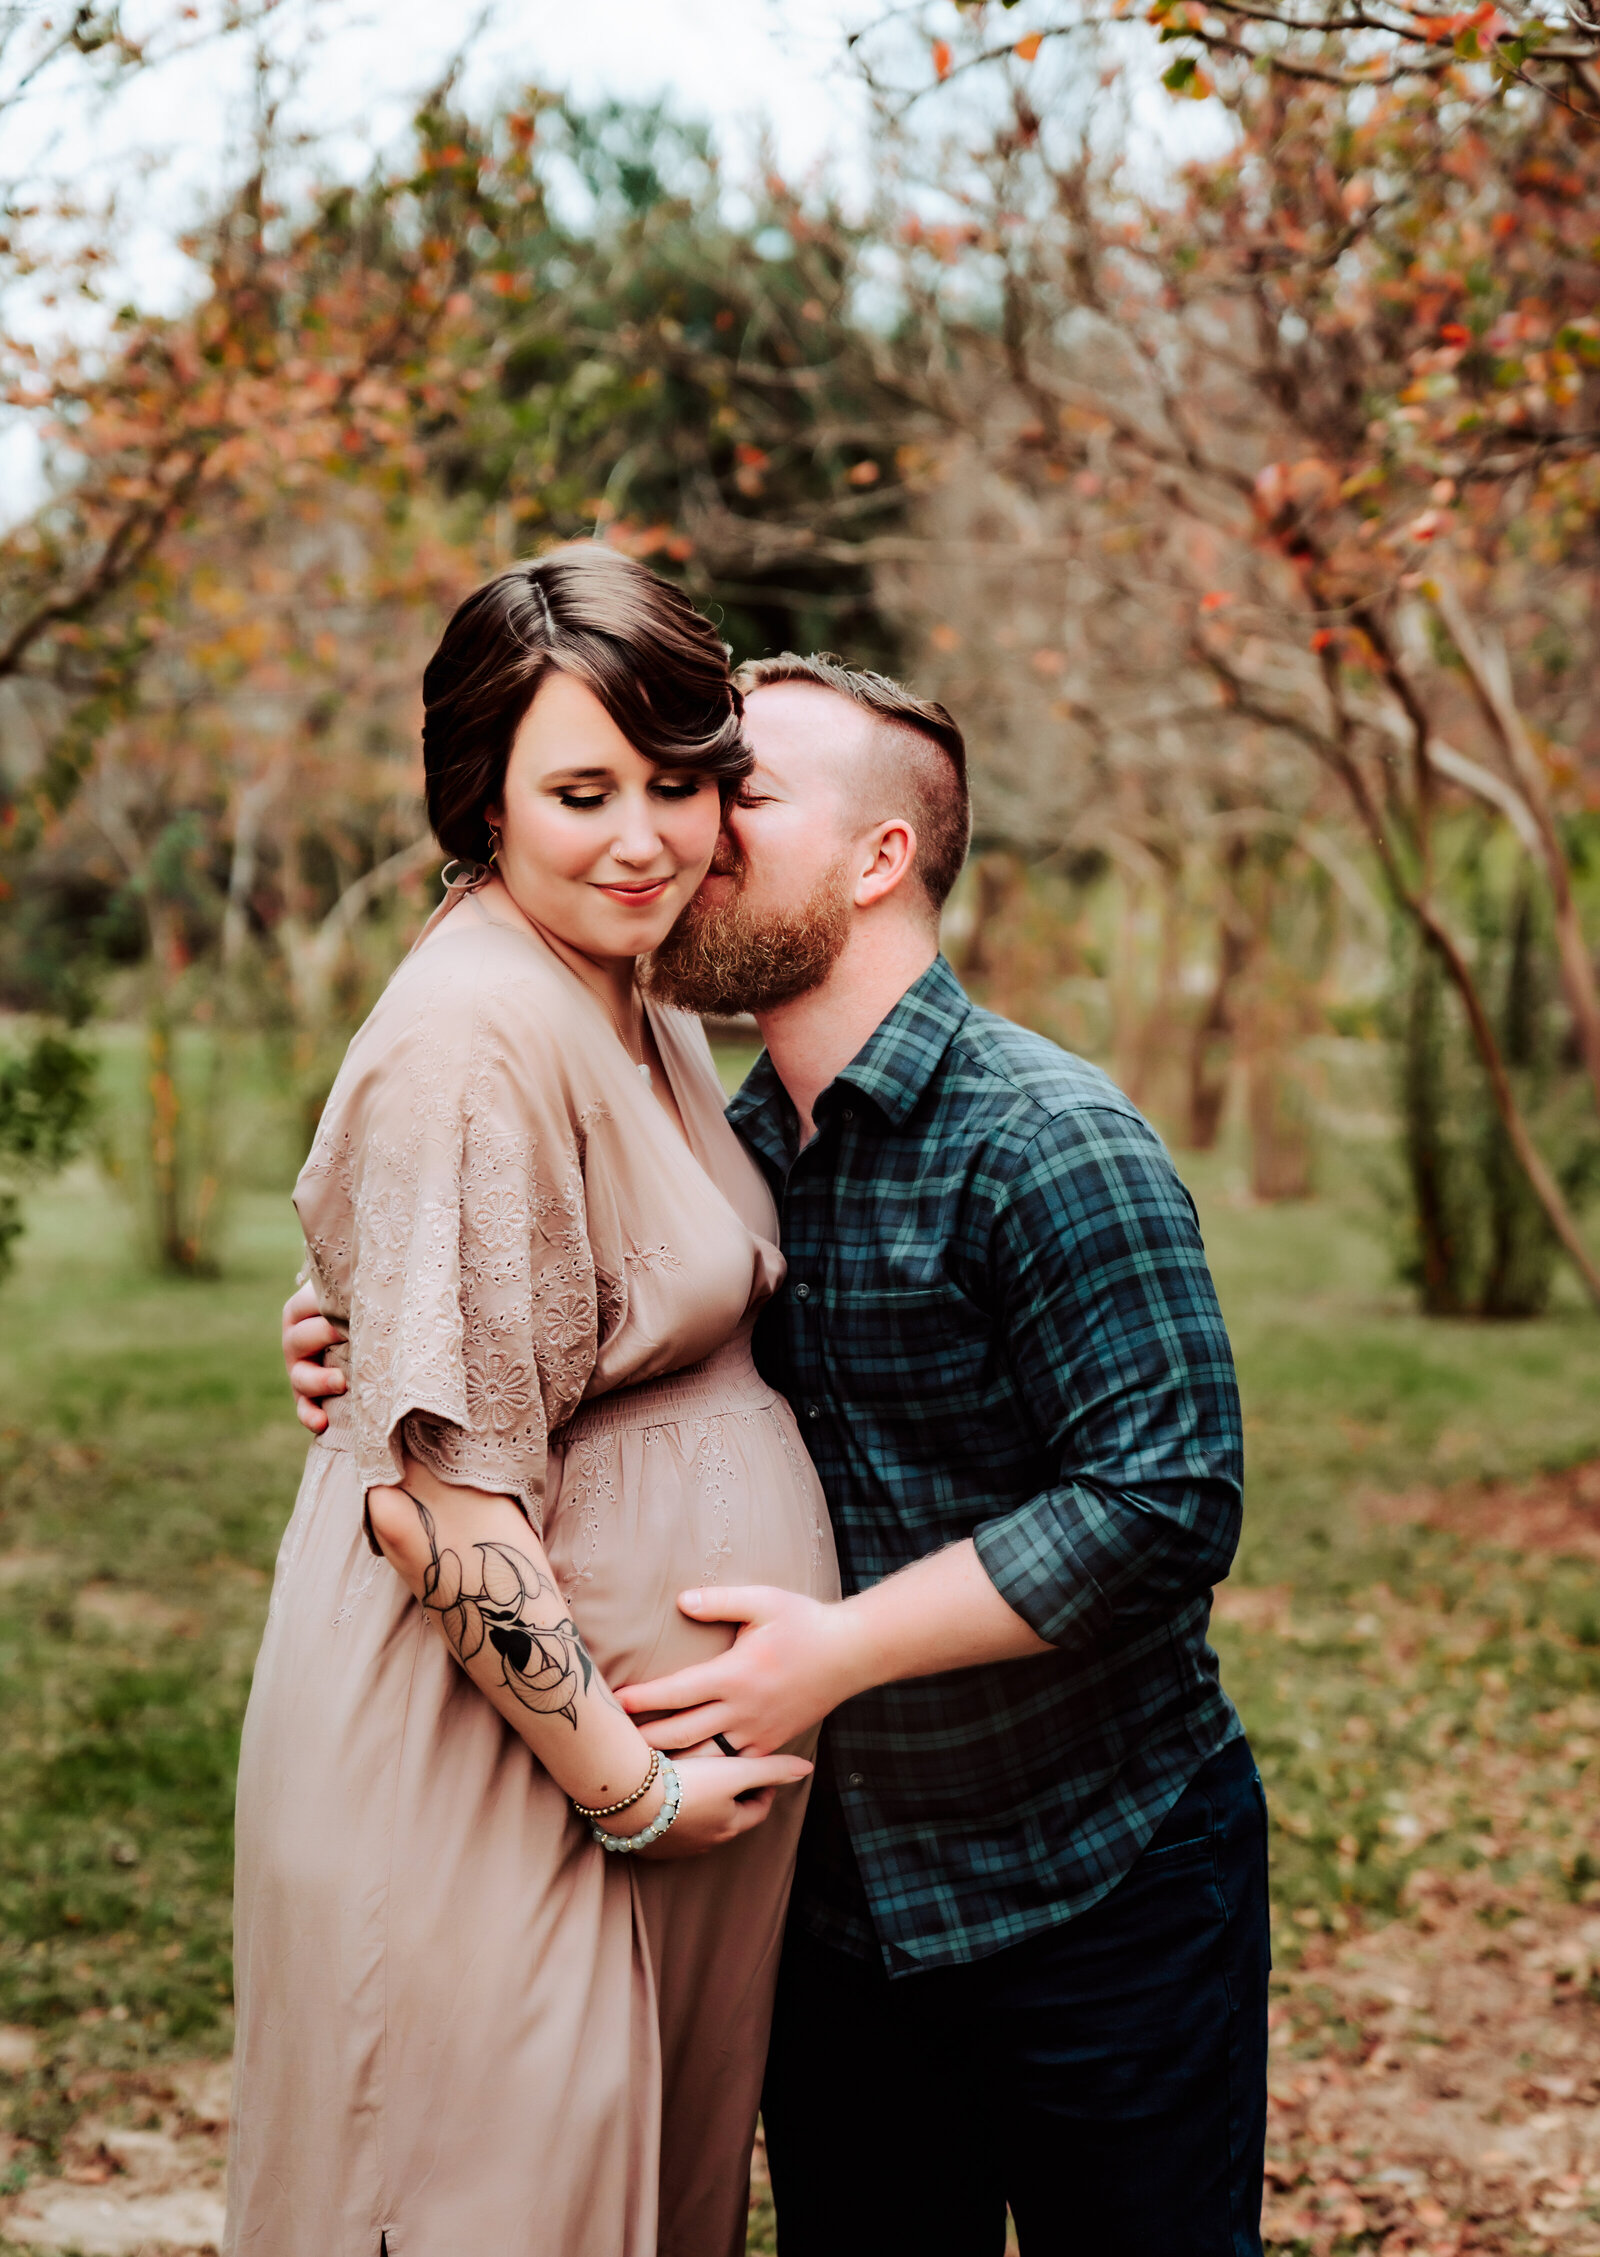 Maternity Photographer, a husband kisses his pregnant wife outdoors